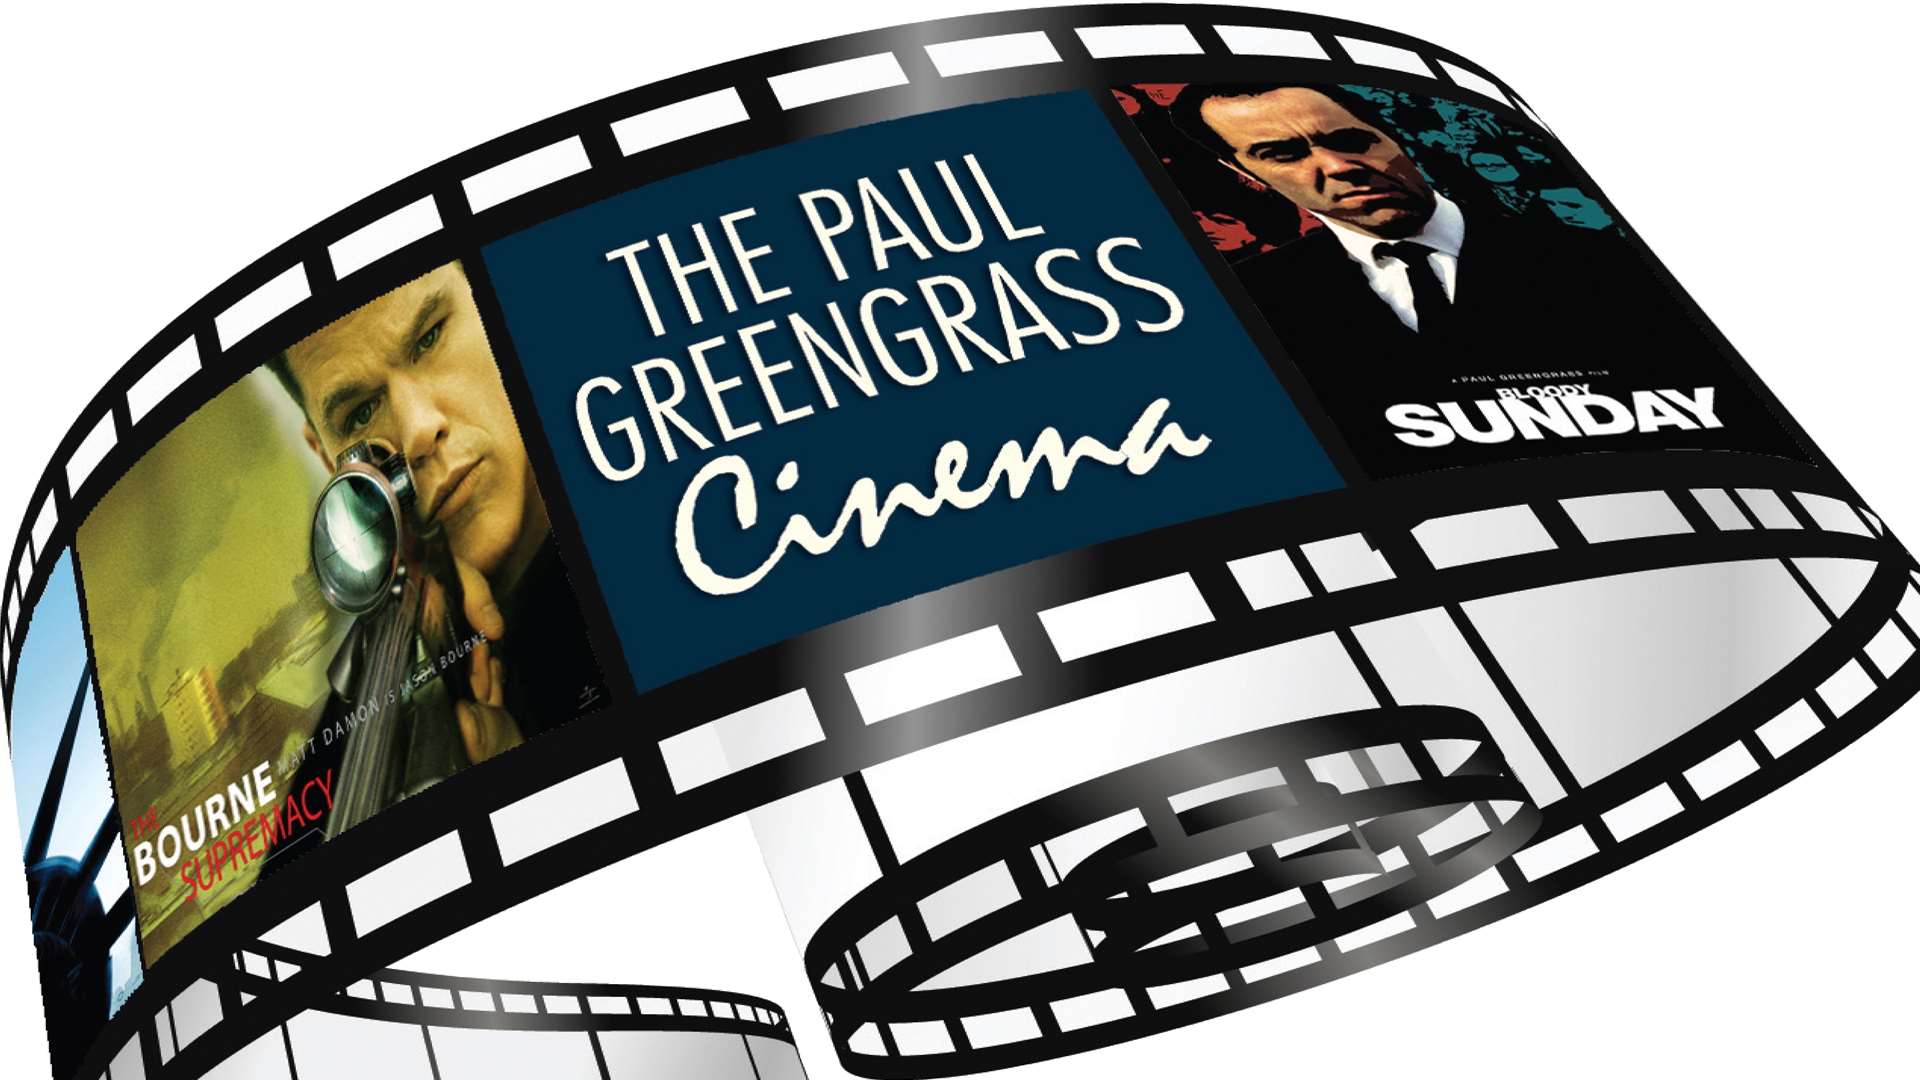 The Gravesend Film Club will screen movies from the Paul Greengrass Cinema in The Woodville, Gravesend